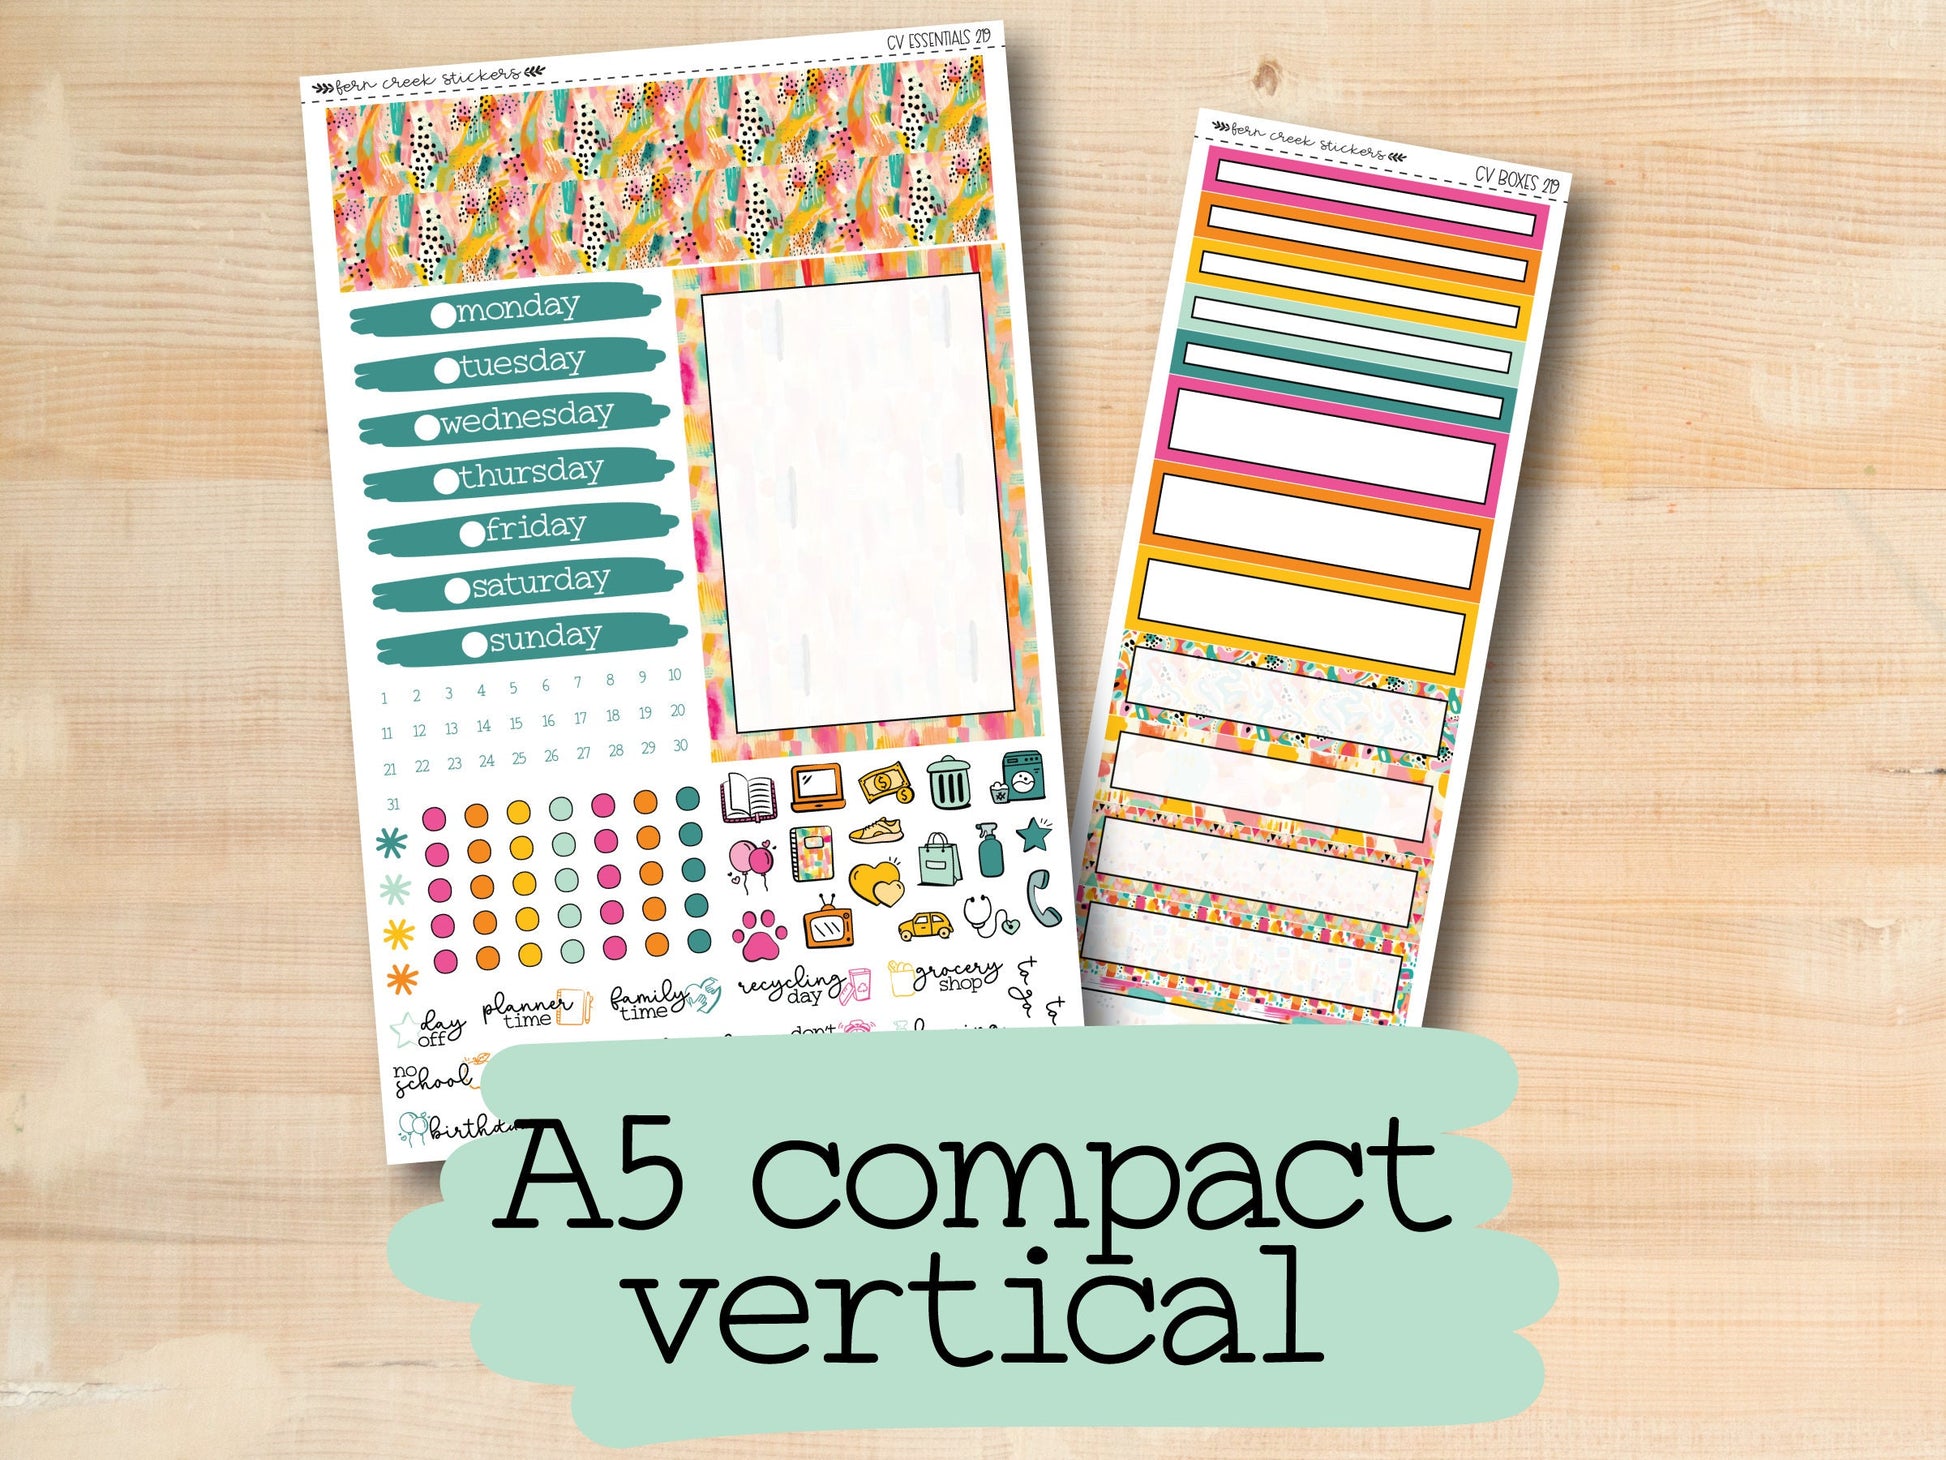 a5 compact vertical vertical stickers with the text a5 compact vertical stickers